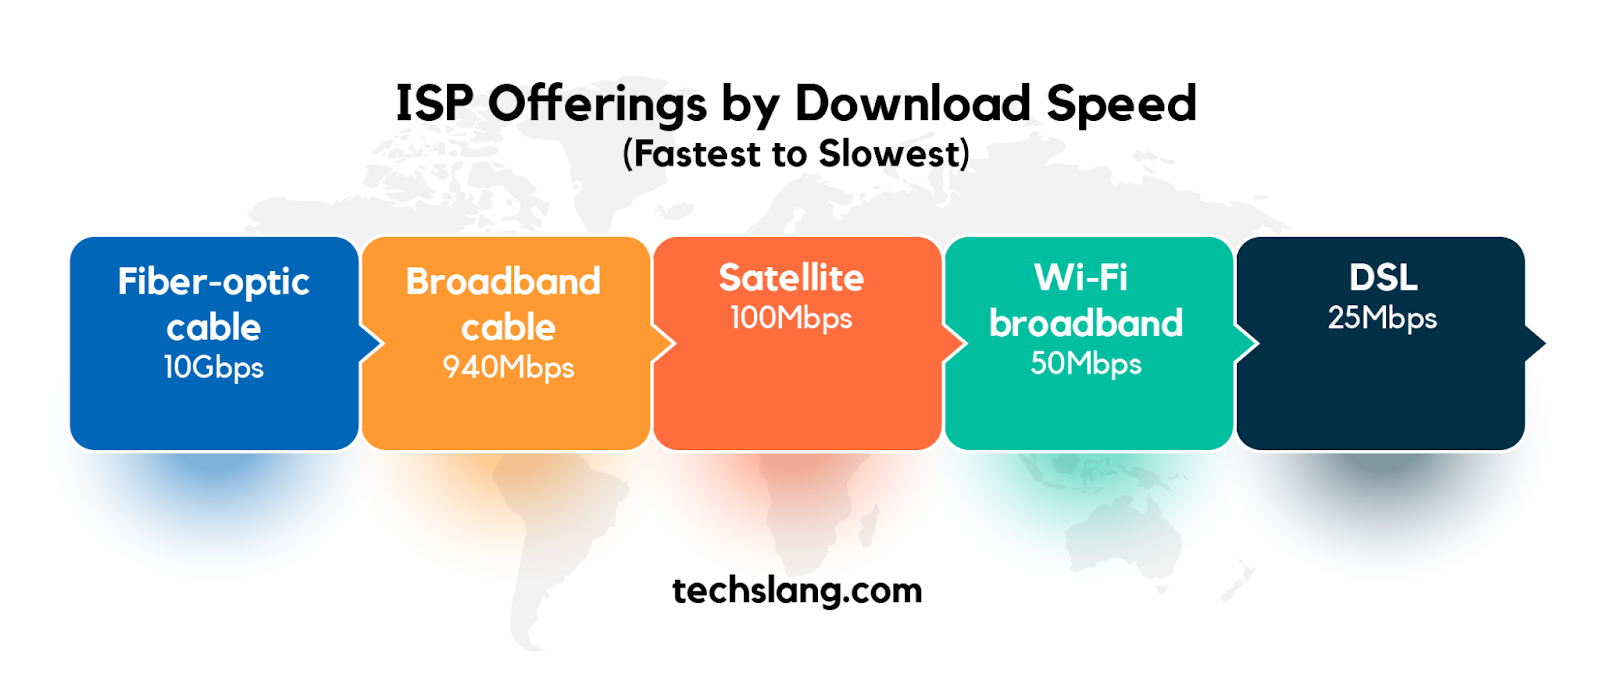 ISP Offerings by Download Speed